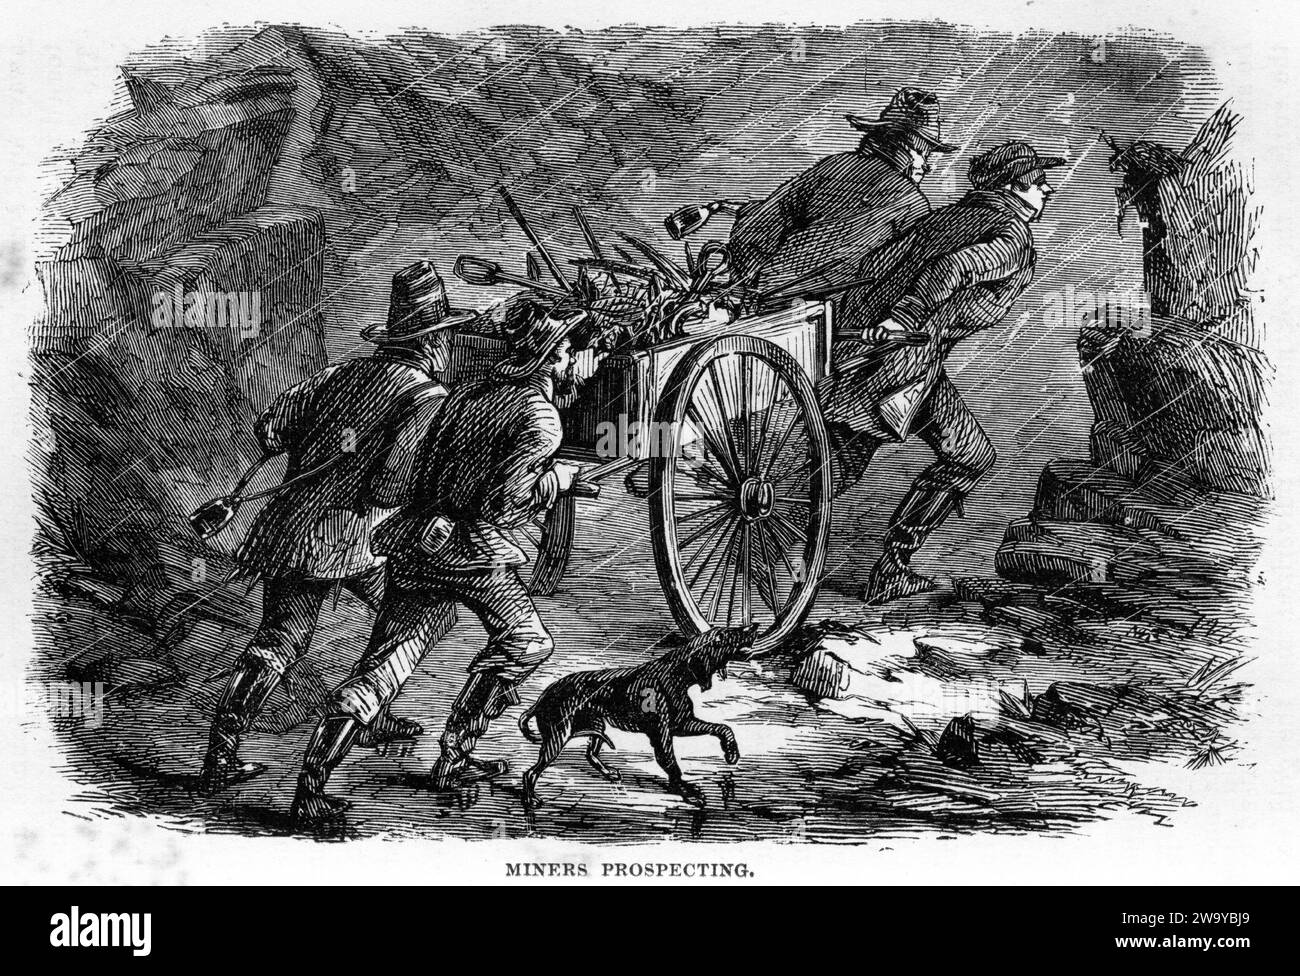 Engraving of prospectors rushing to an alluvial goldfield, common practice throughout the USA, New Zealand and Australia during the late 1800s, from The Underground World, circa 1878 Stock Photo